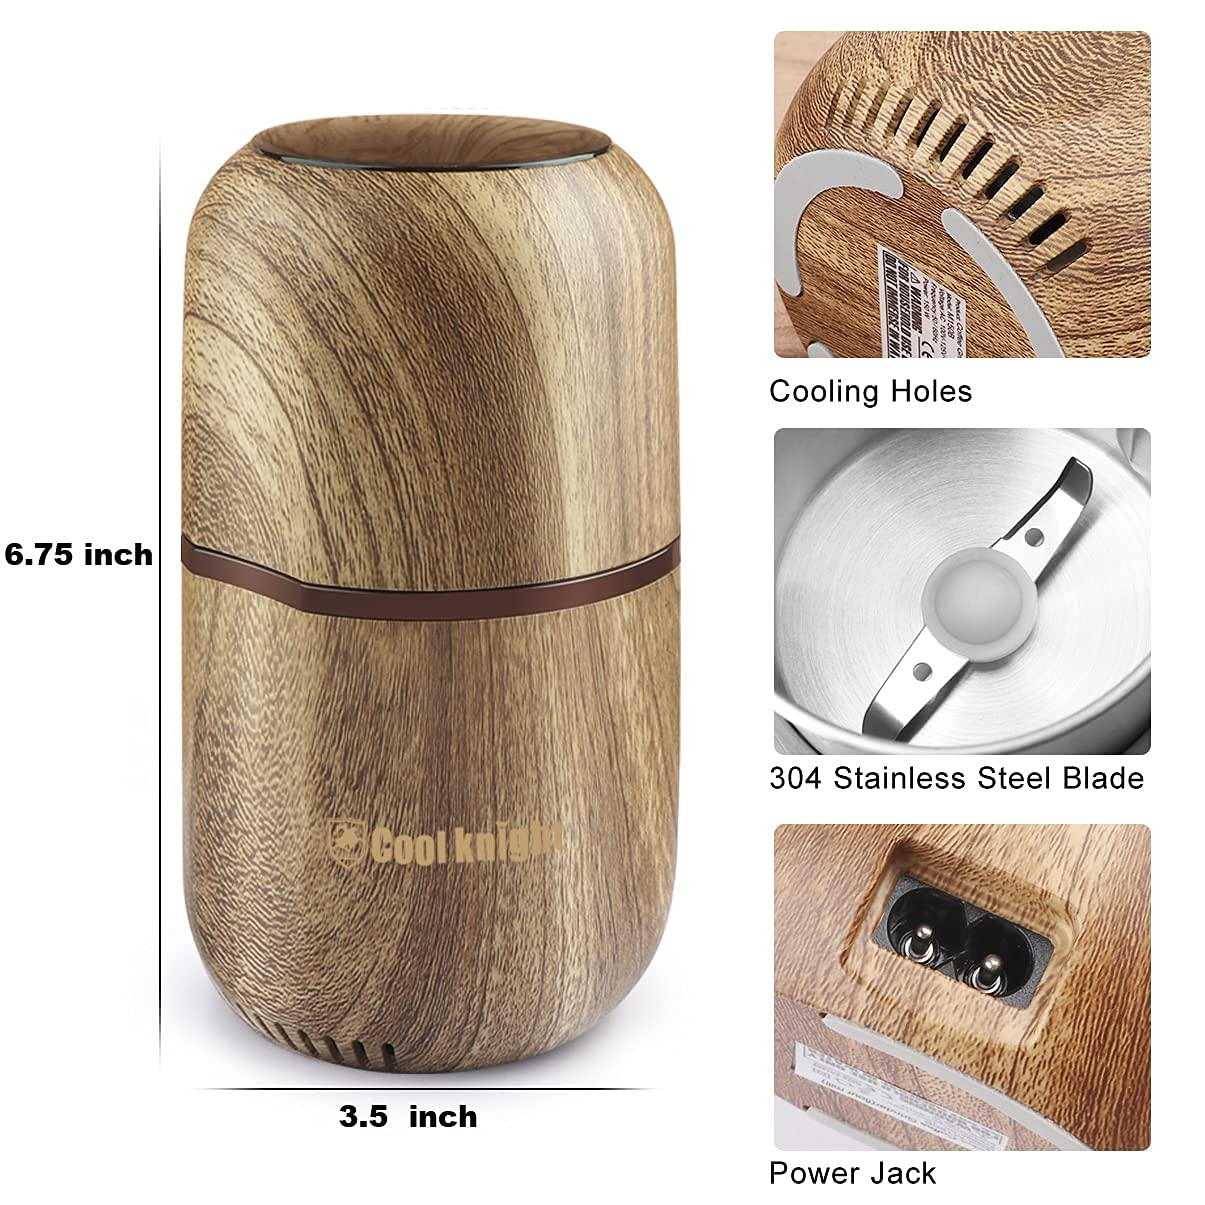 COOL KNIGHT Herb Grinder Electric Spice Grinder [Large Capacity/High Rotating Speed/Electric]-Electric Grinder for Spices and He